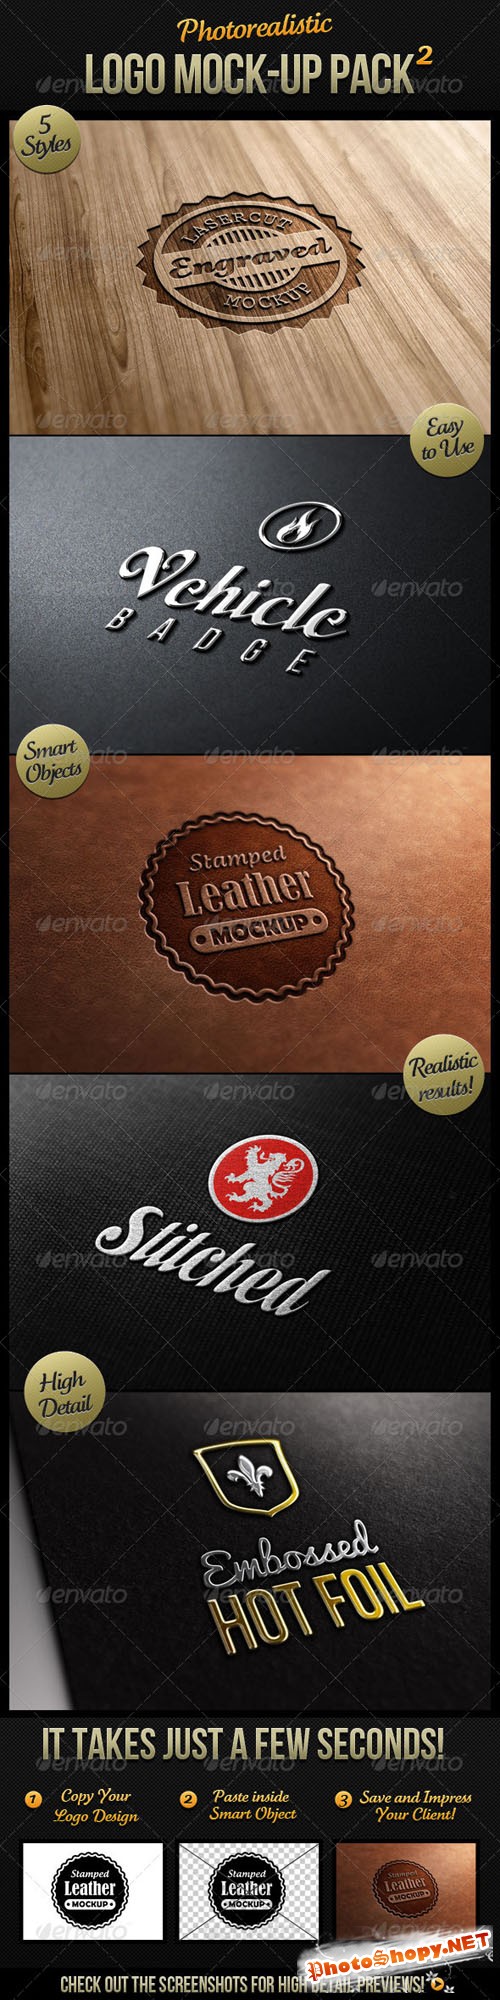 GraphicRiver - Photorealistic Logo Mock-Up Pack 2 - 1984512